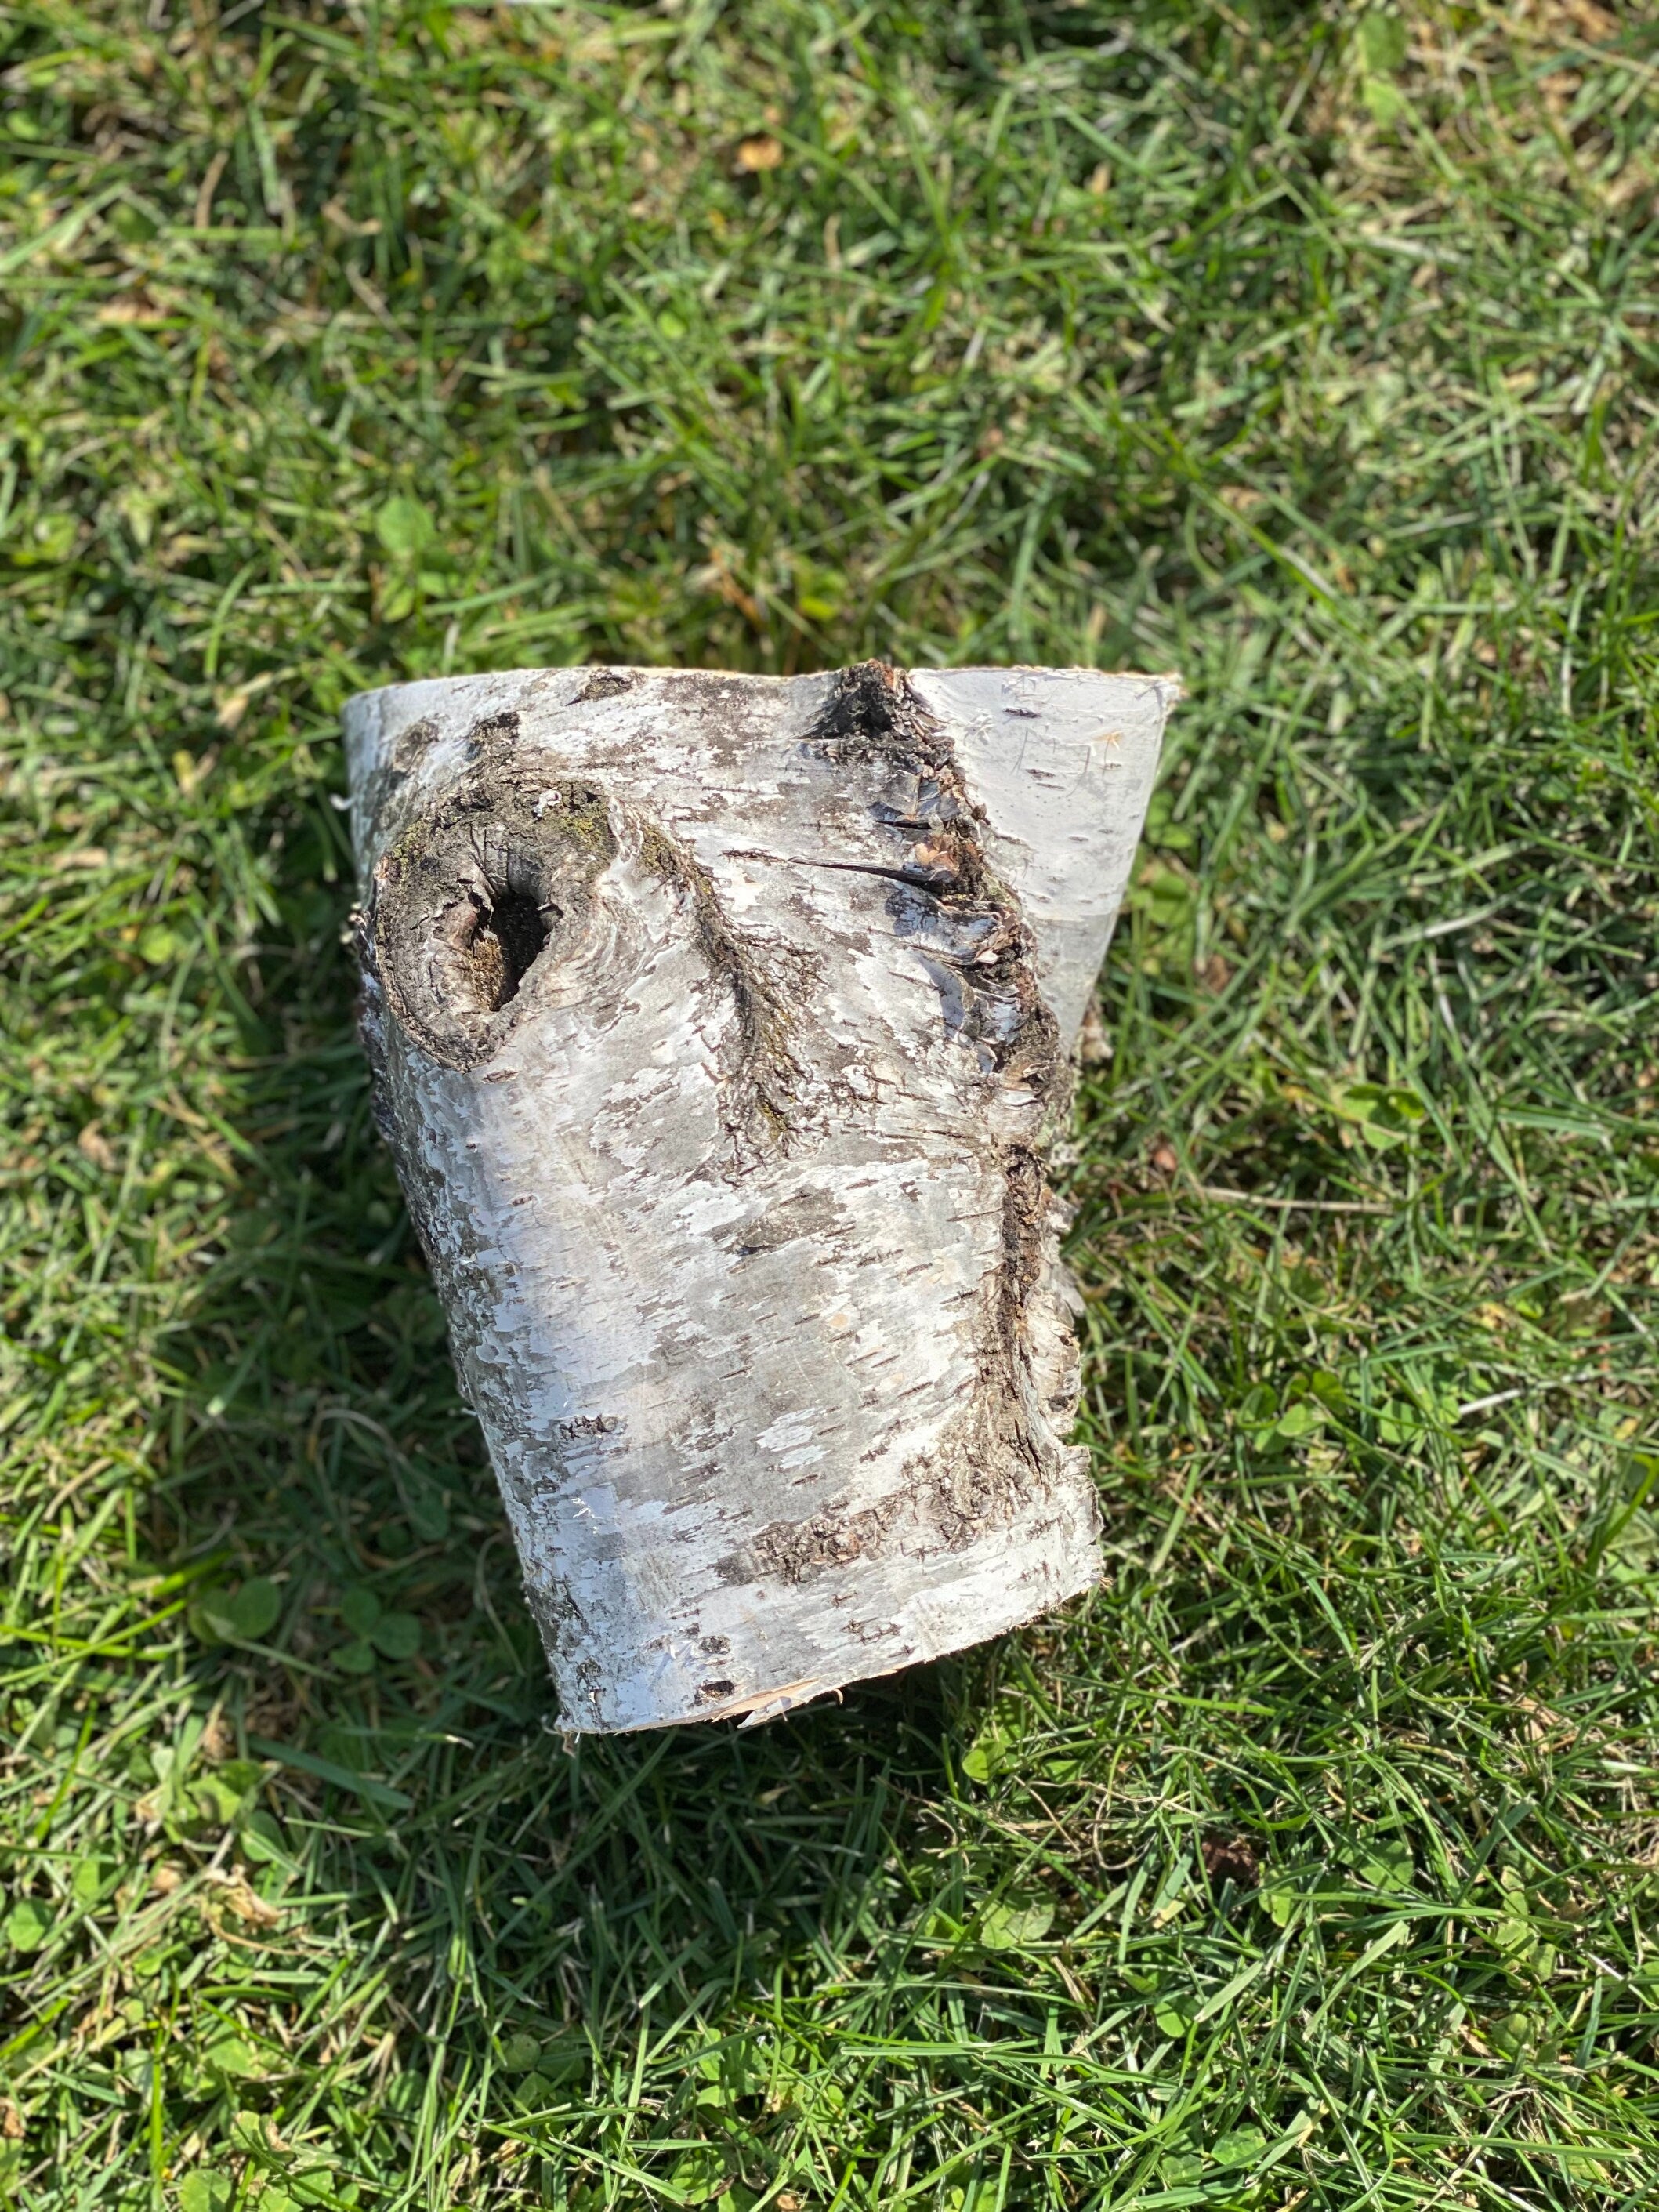 Small White Birch Log, Approximately 7 Inches Long by about 5.5 Inches Wide and 4 Inches Tall